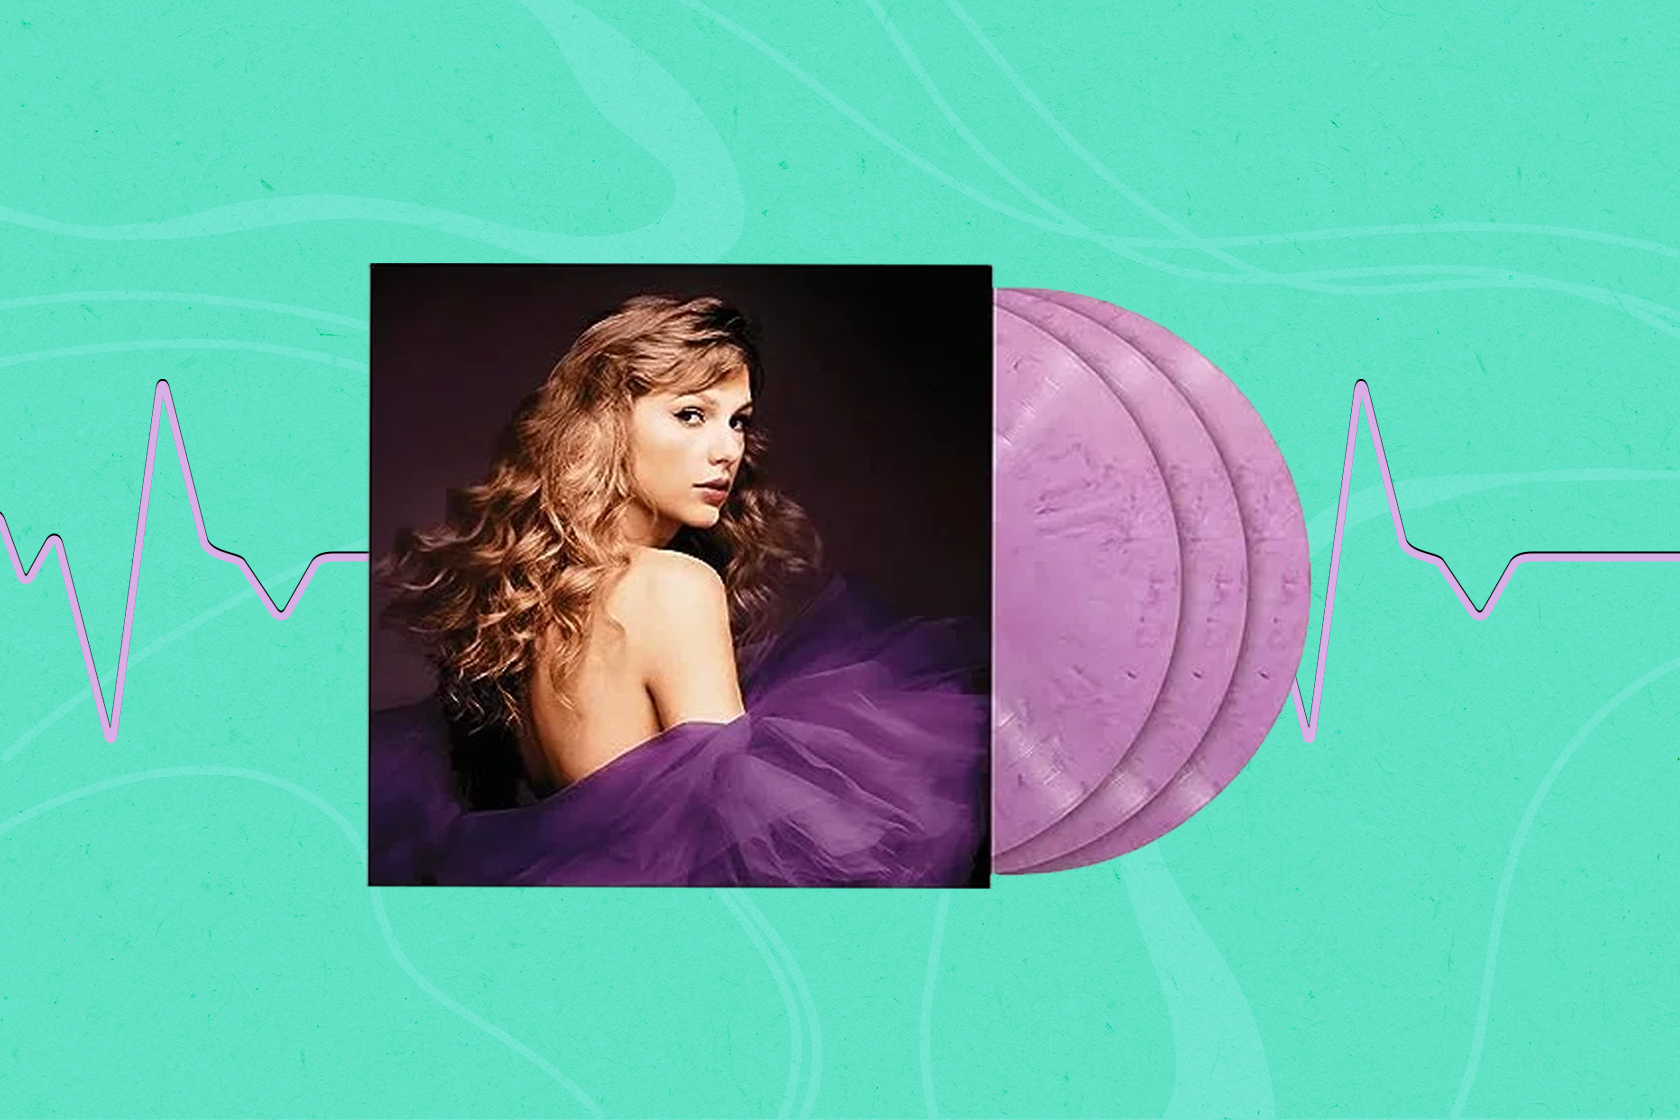 Taylor swift vinyl • Compare & find best prices today »